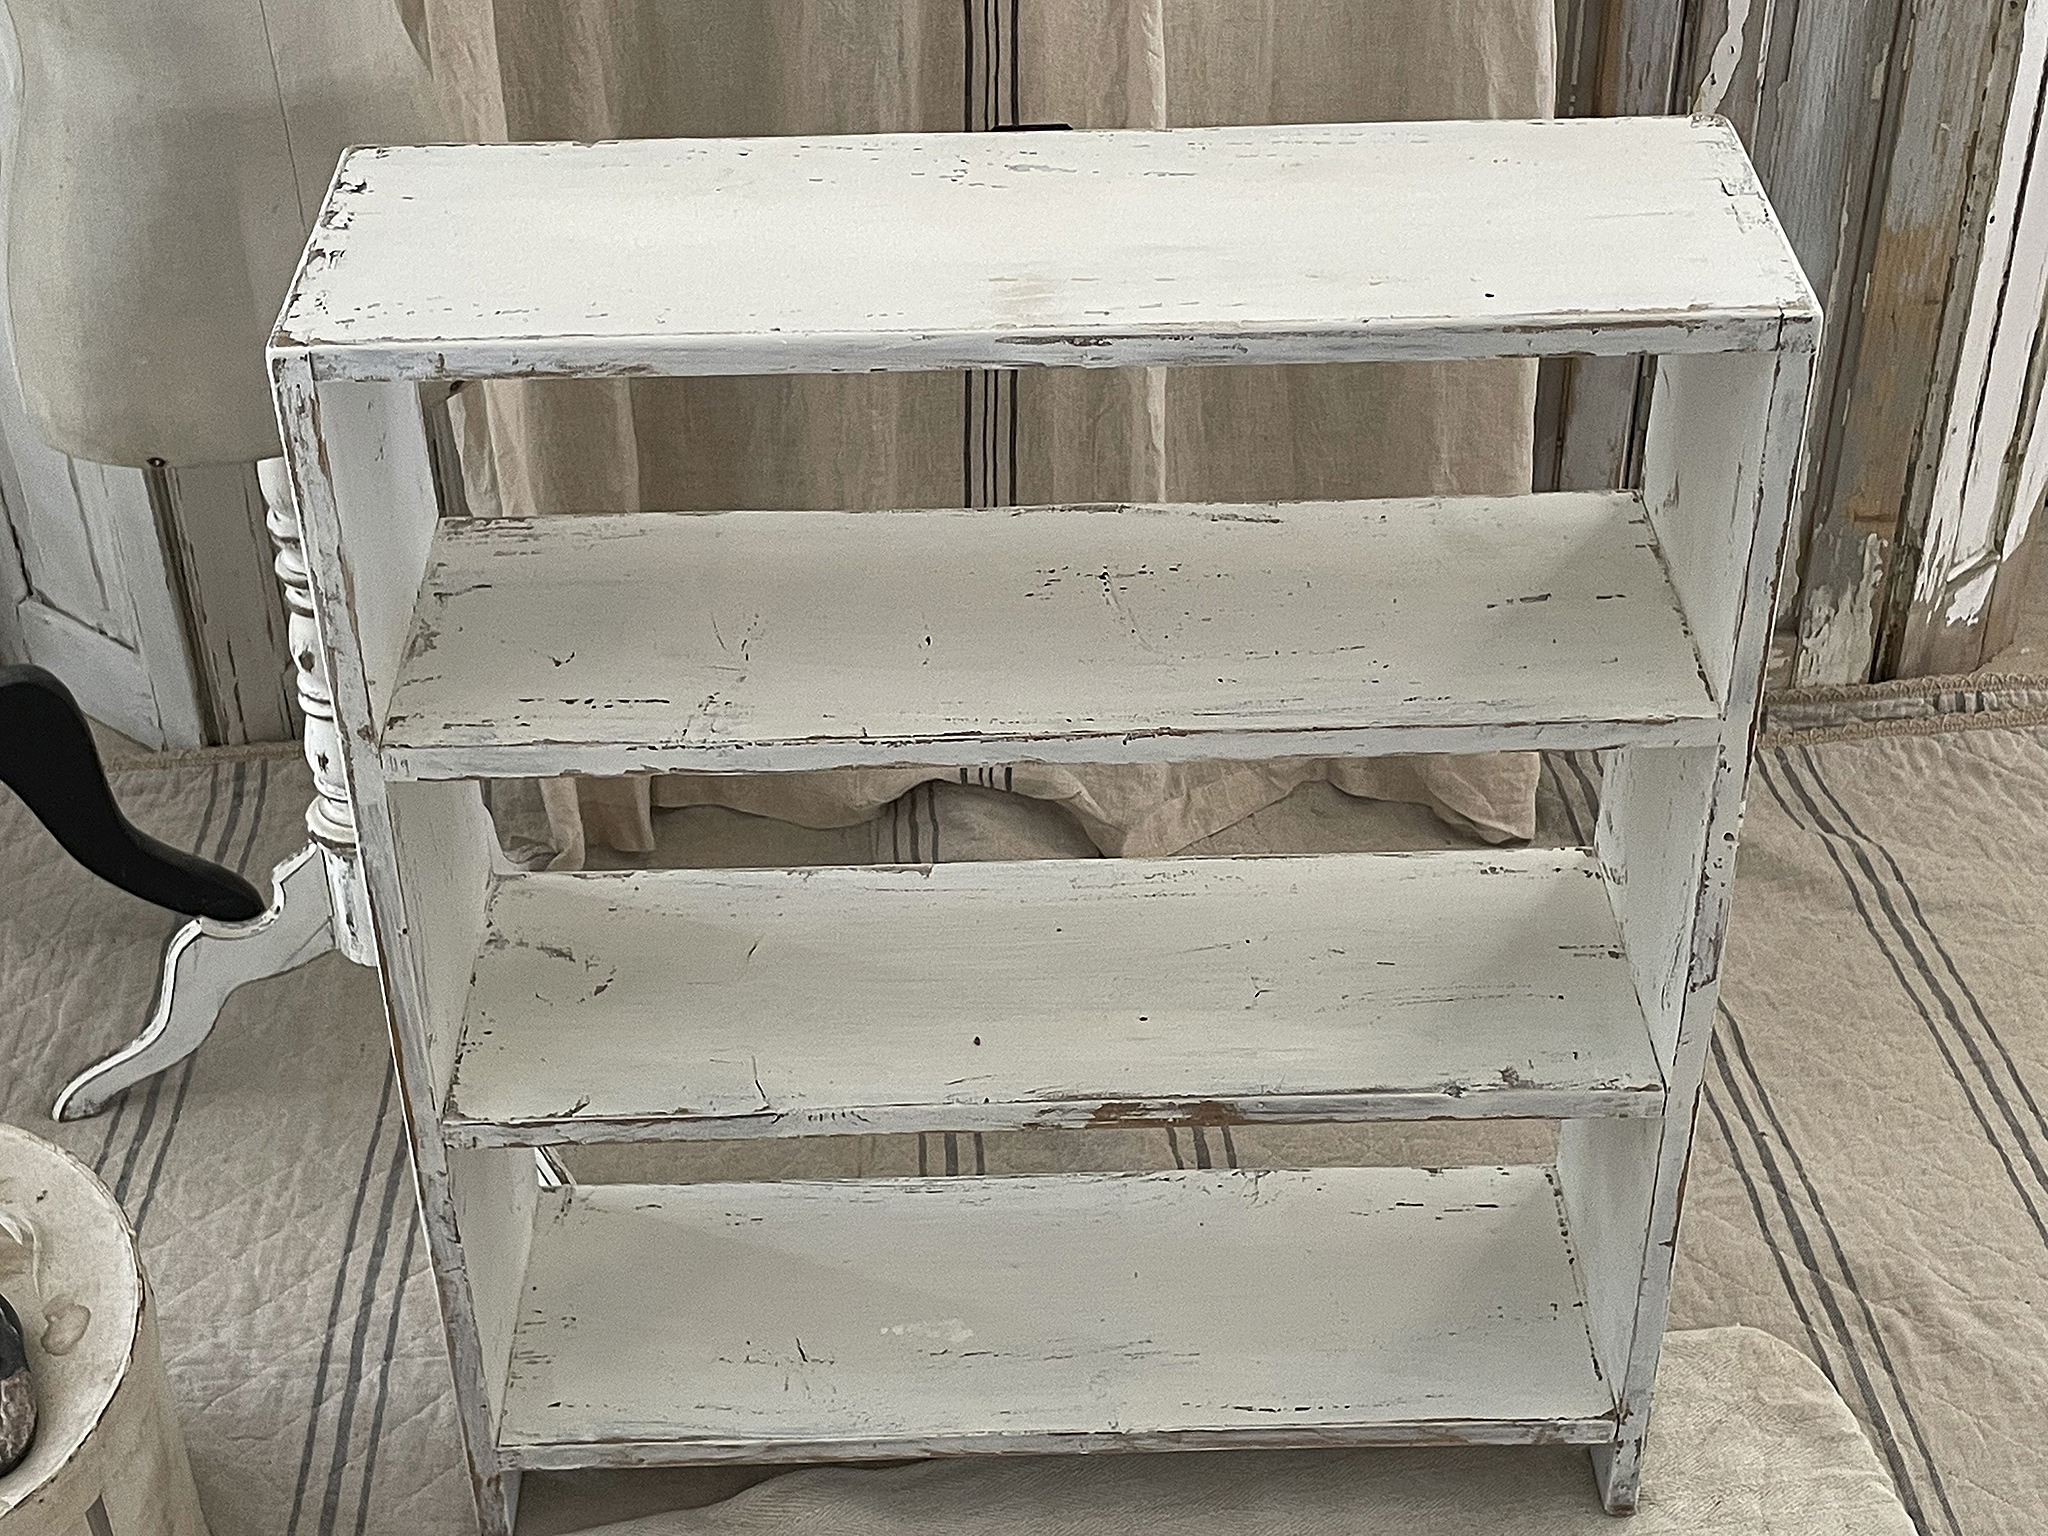 Reserviert! Altes Standregal Shabby-Chic No.25***